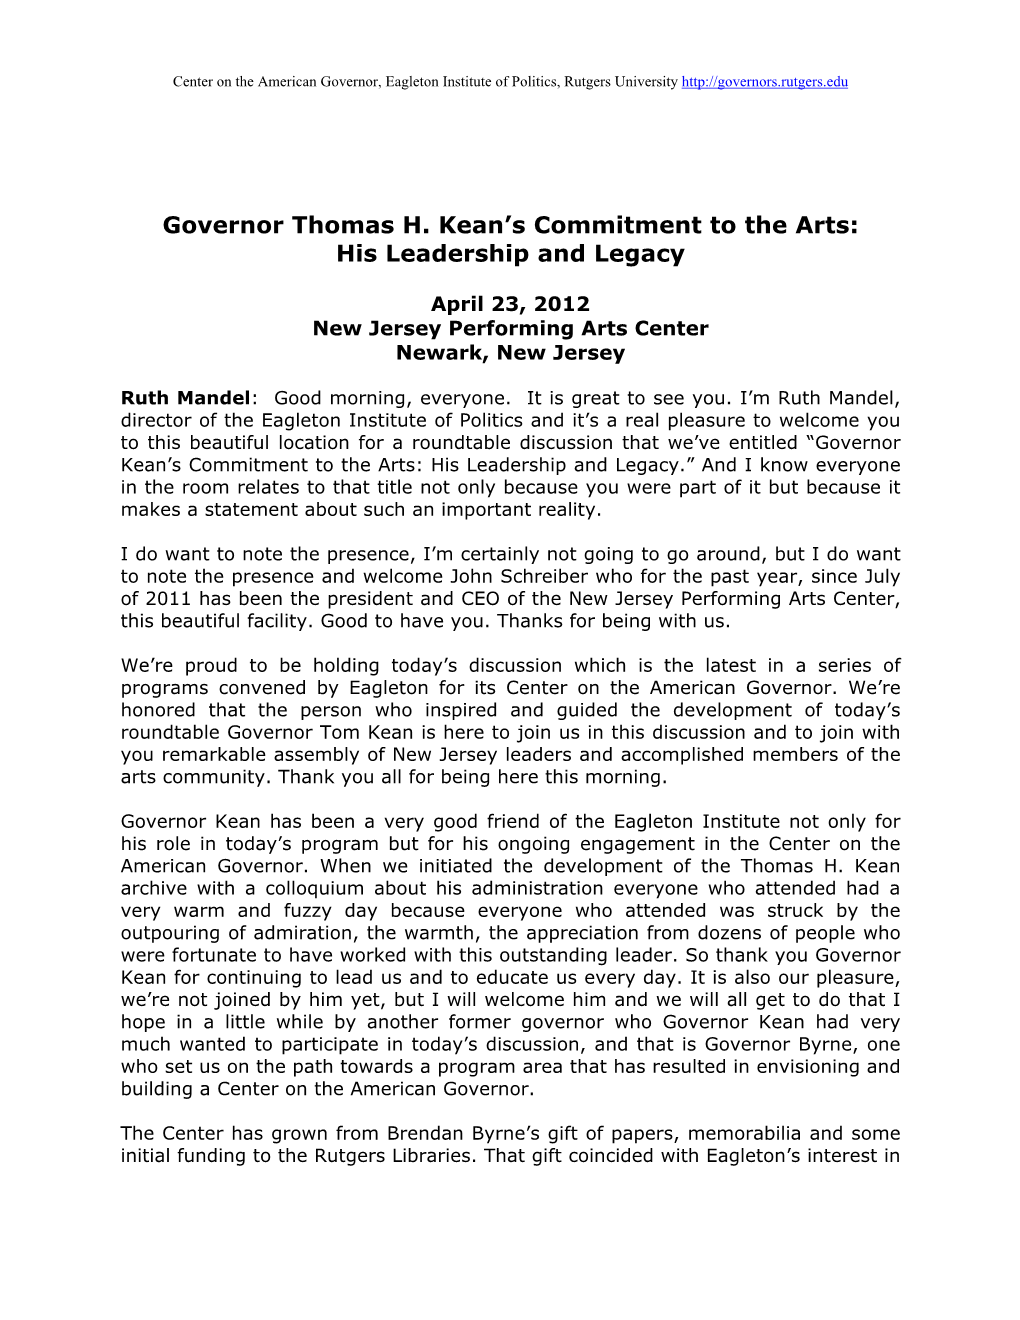 Governor Thomas H. Kean's Commitment to the Arts: His